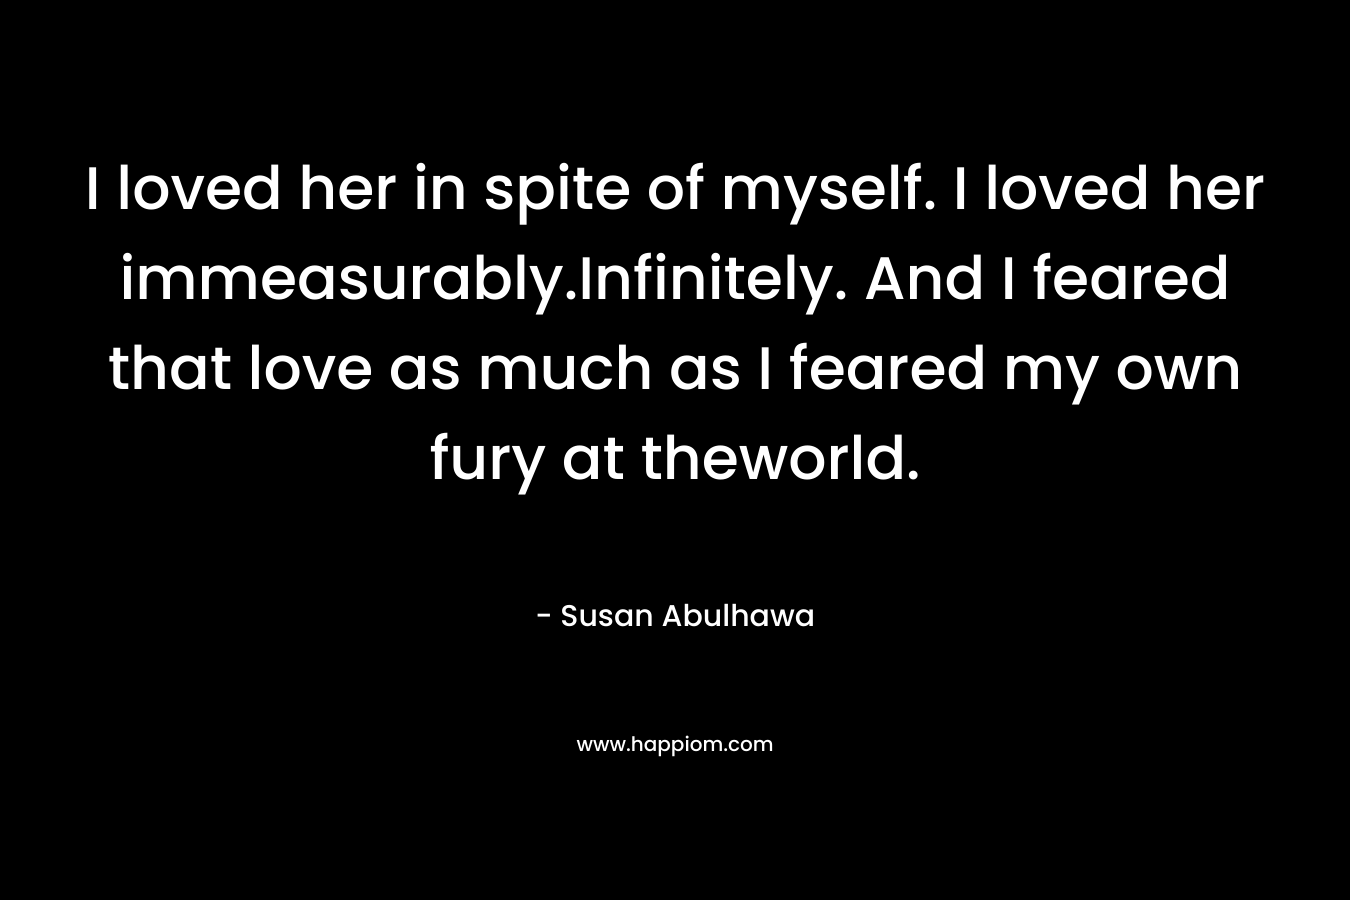 I loved her in spite of myself. I loved her immeasurably.Infinitely. And I feared that love as much as I feared my own fury at theworld. – Susan Abulhawa